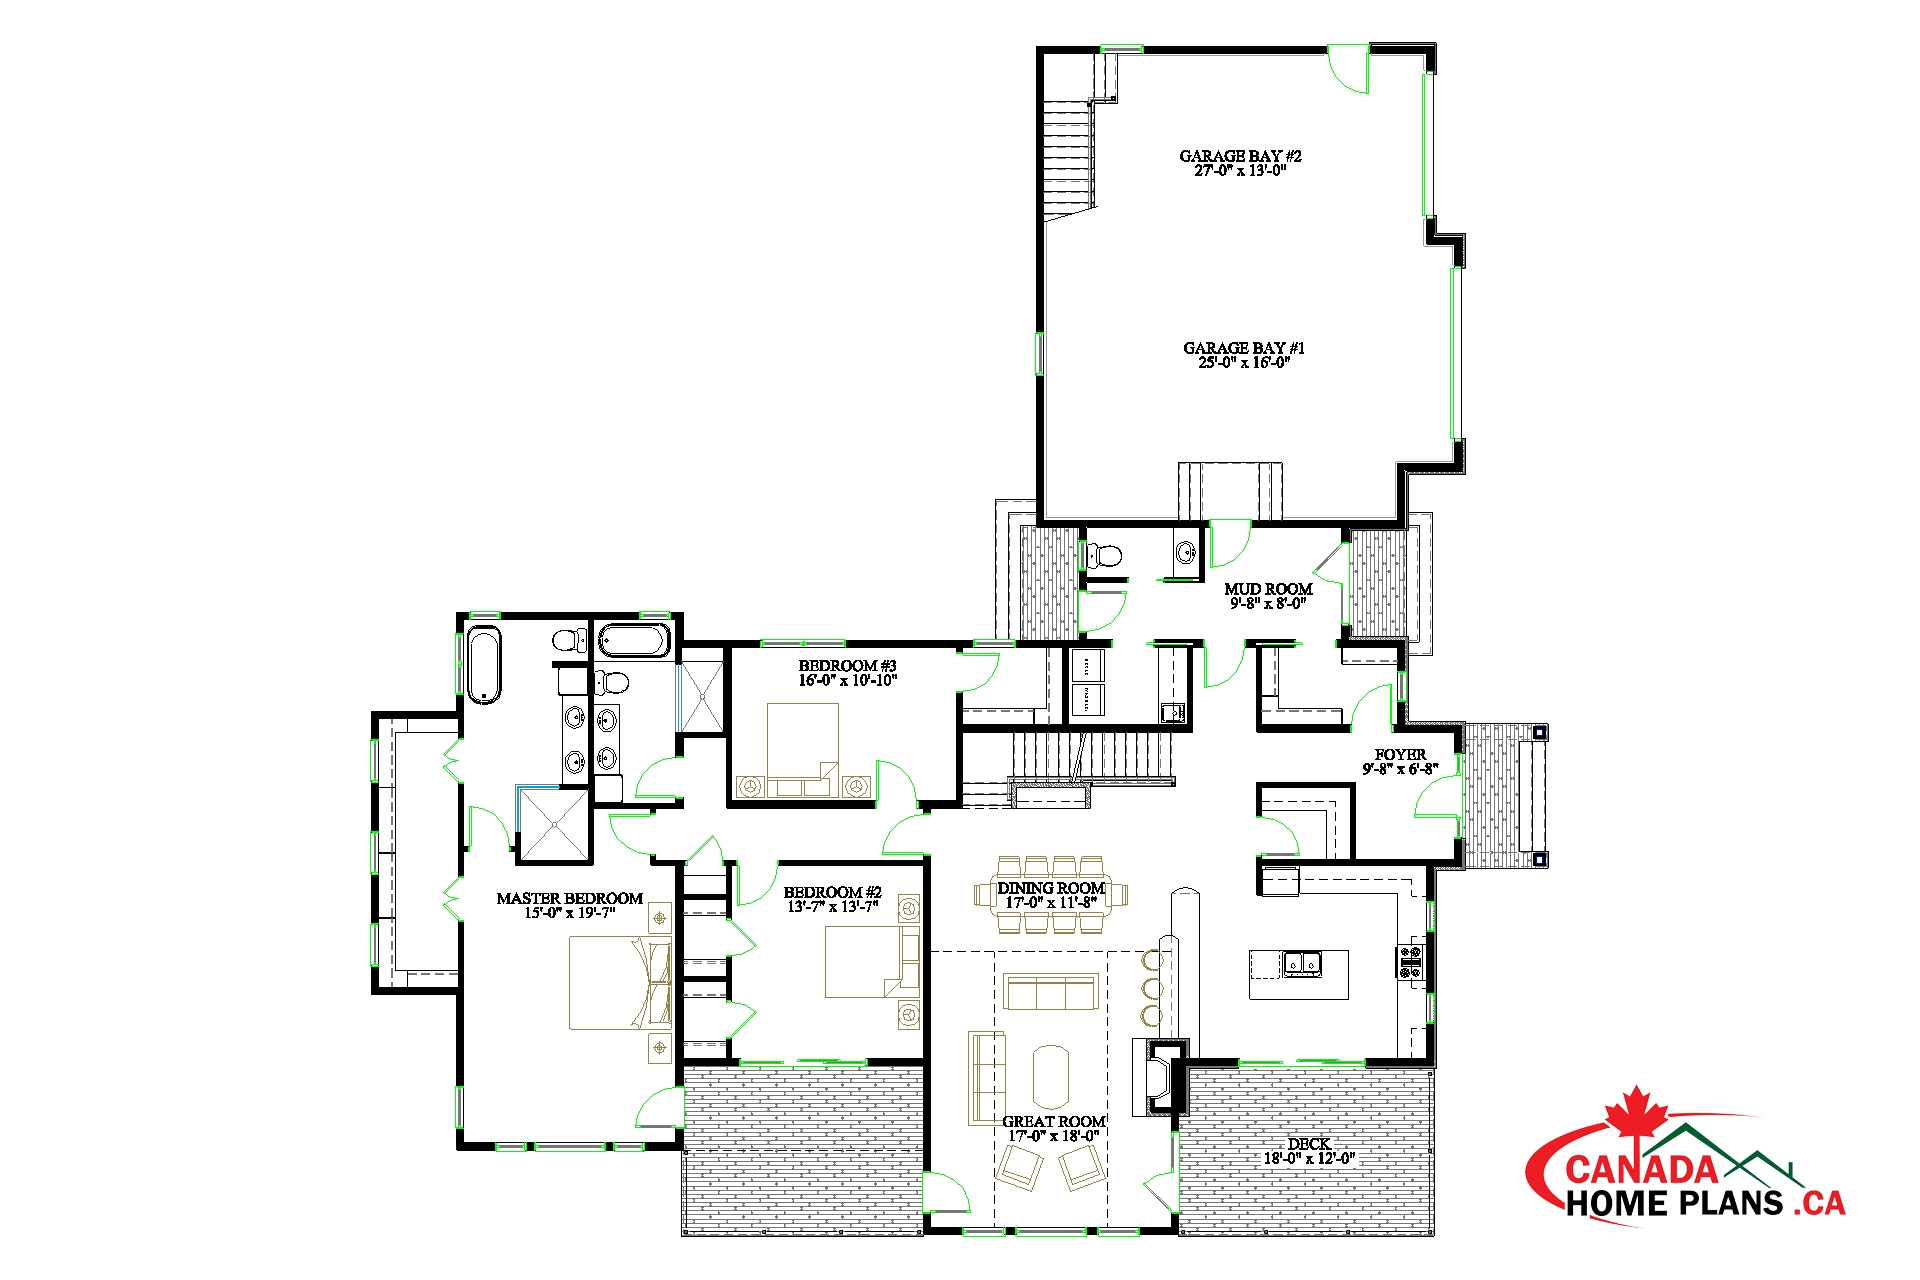 Georgetown - Canada Home Plans